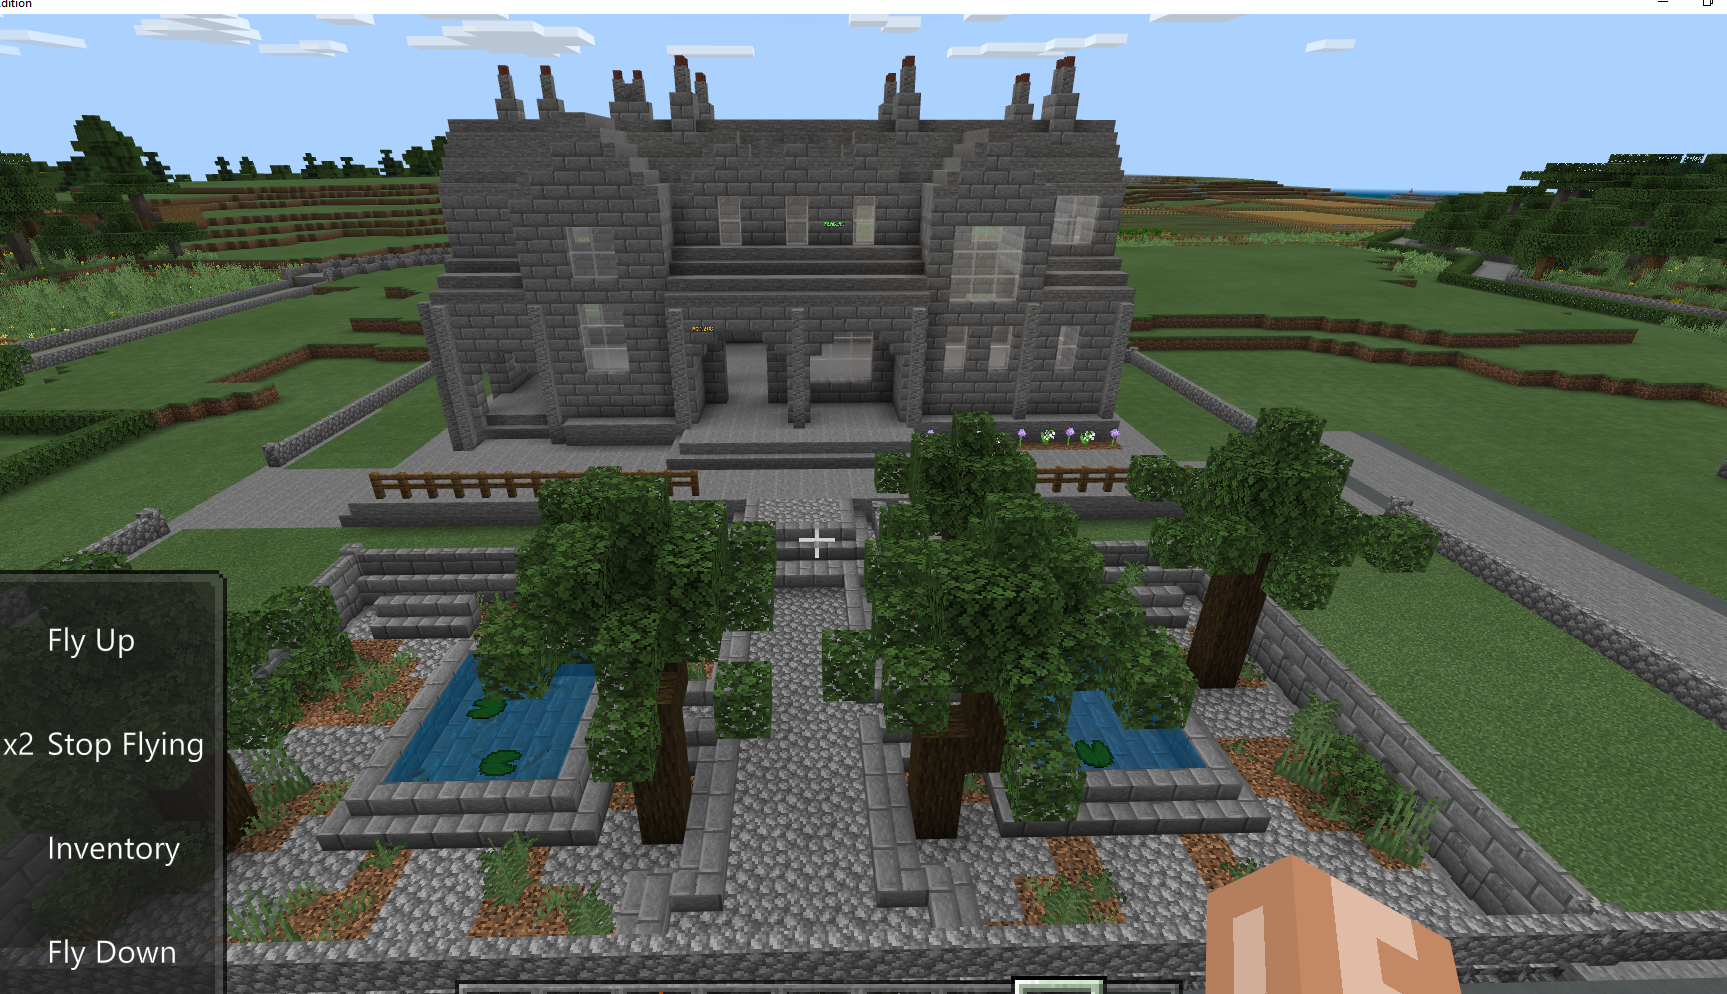 And finally... Isle of Cumbrae recreated in Minecraft